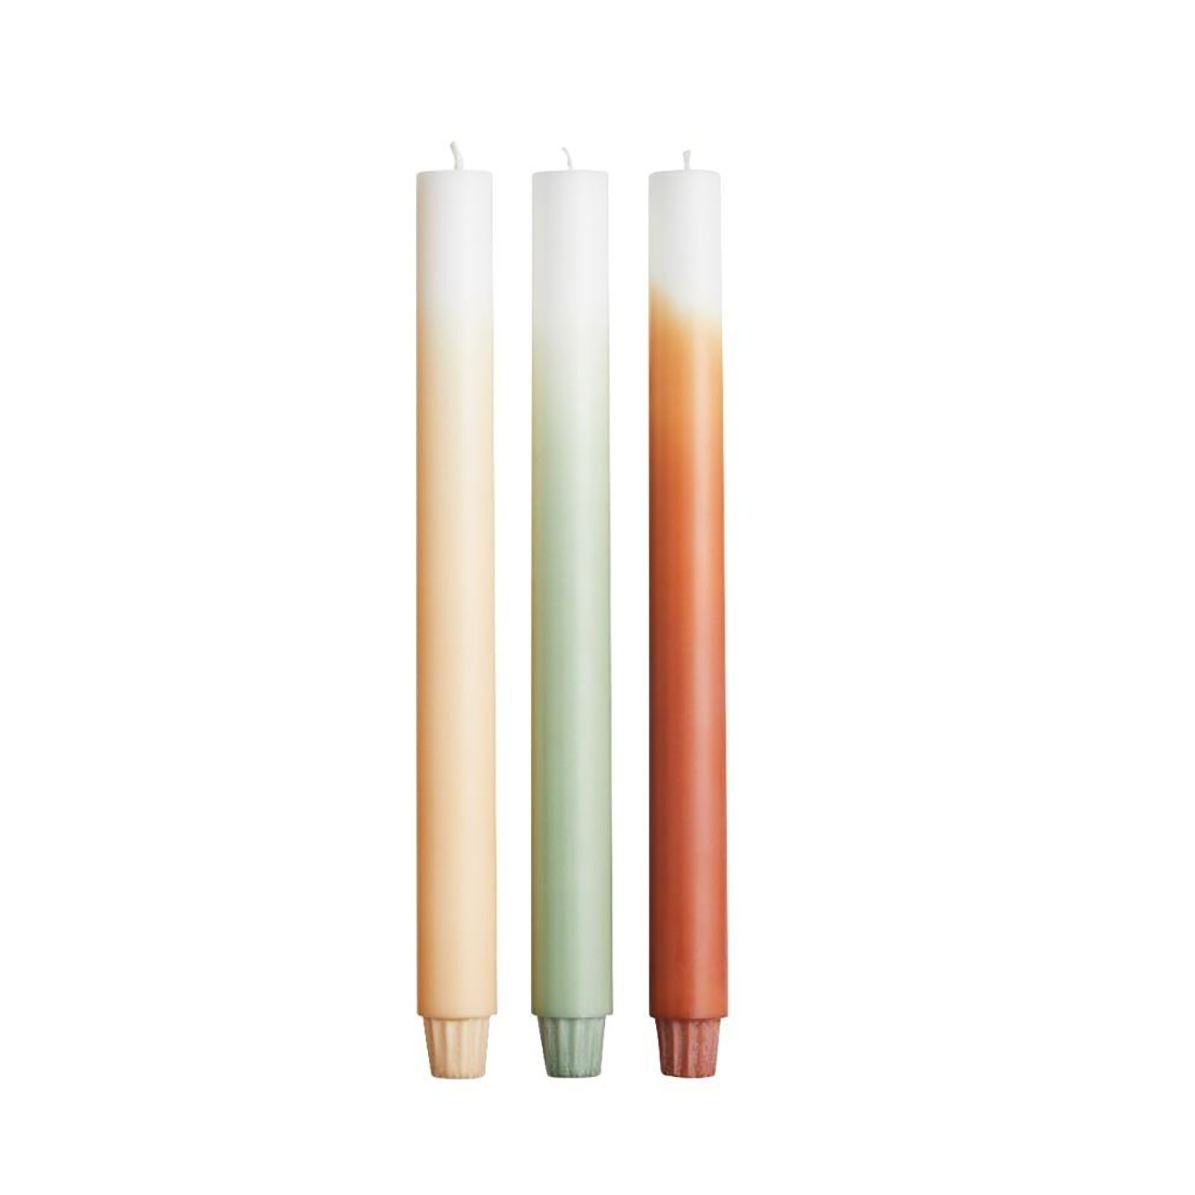 GRADIENT PINE SET OF CANDLES